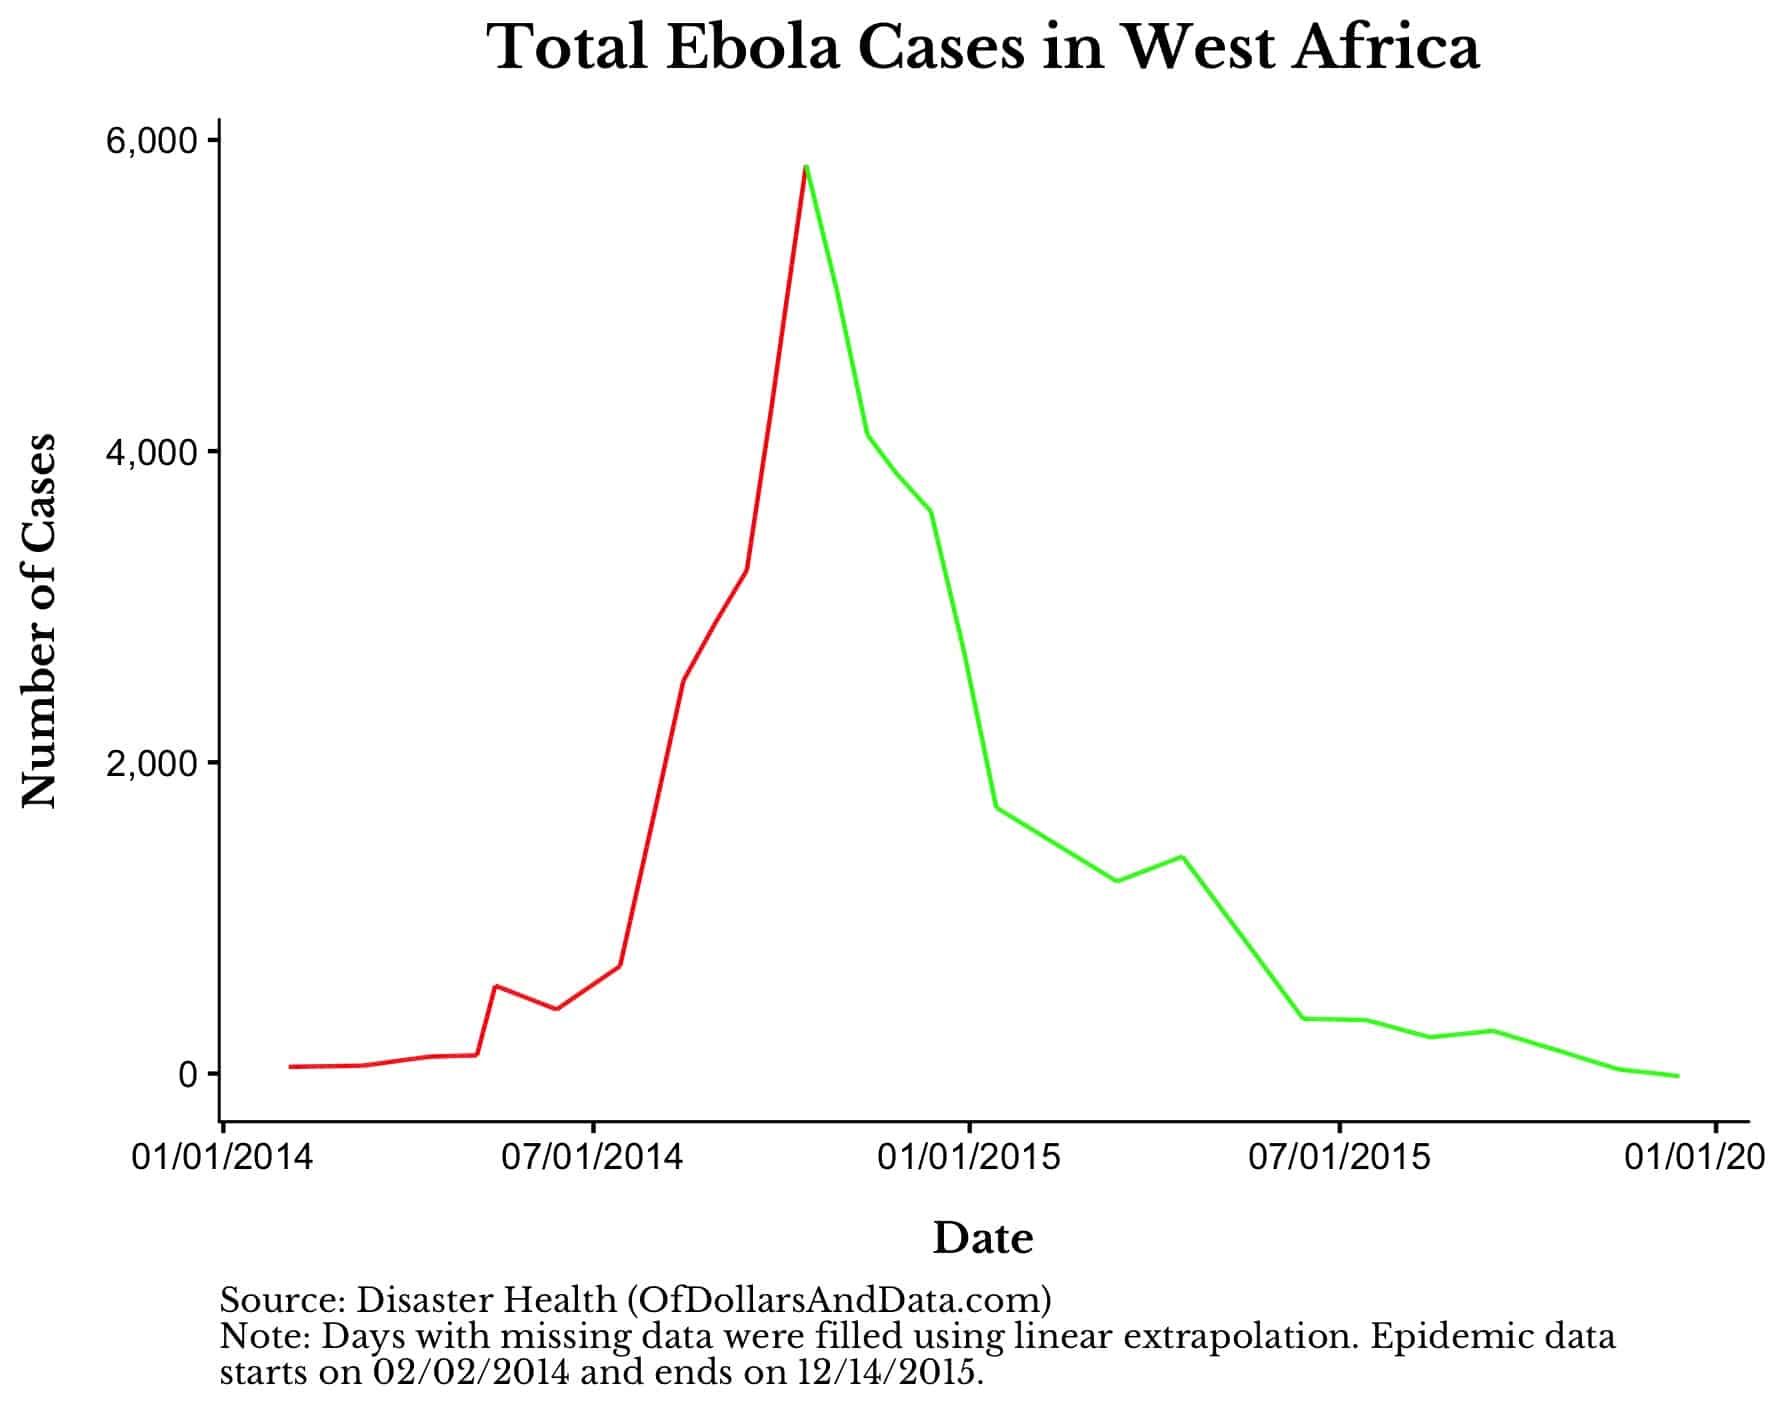 Total Ebola cases in West Africa from 2014-2016